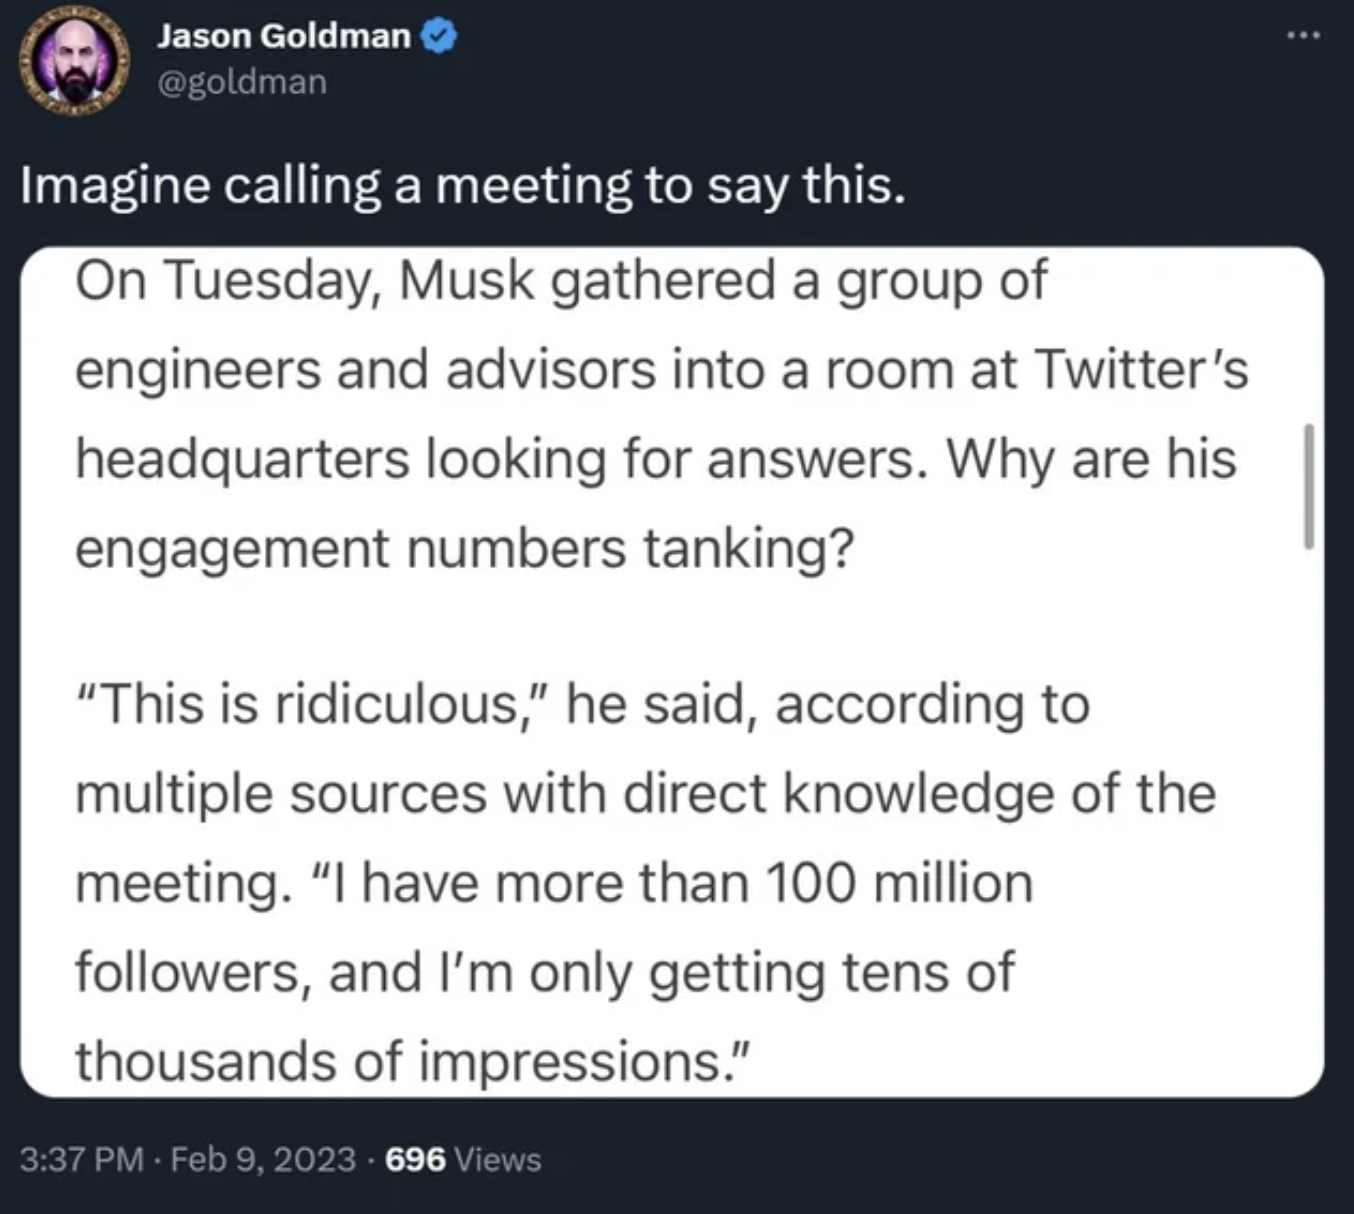 Facepalms - screenshot - Imagine calling a meeting to say this. On Tuesday, Musk gathered a group of engineers and advisors into a room at Twitter's headquarters looking for answers. Why are his engagement numbers tanking?